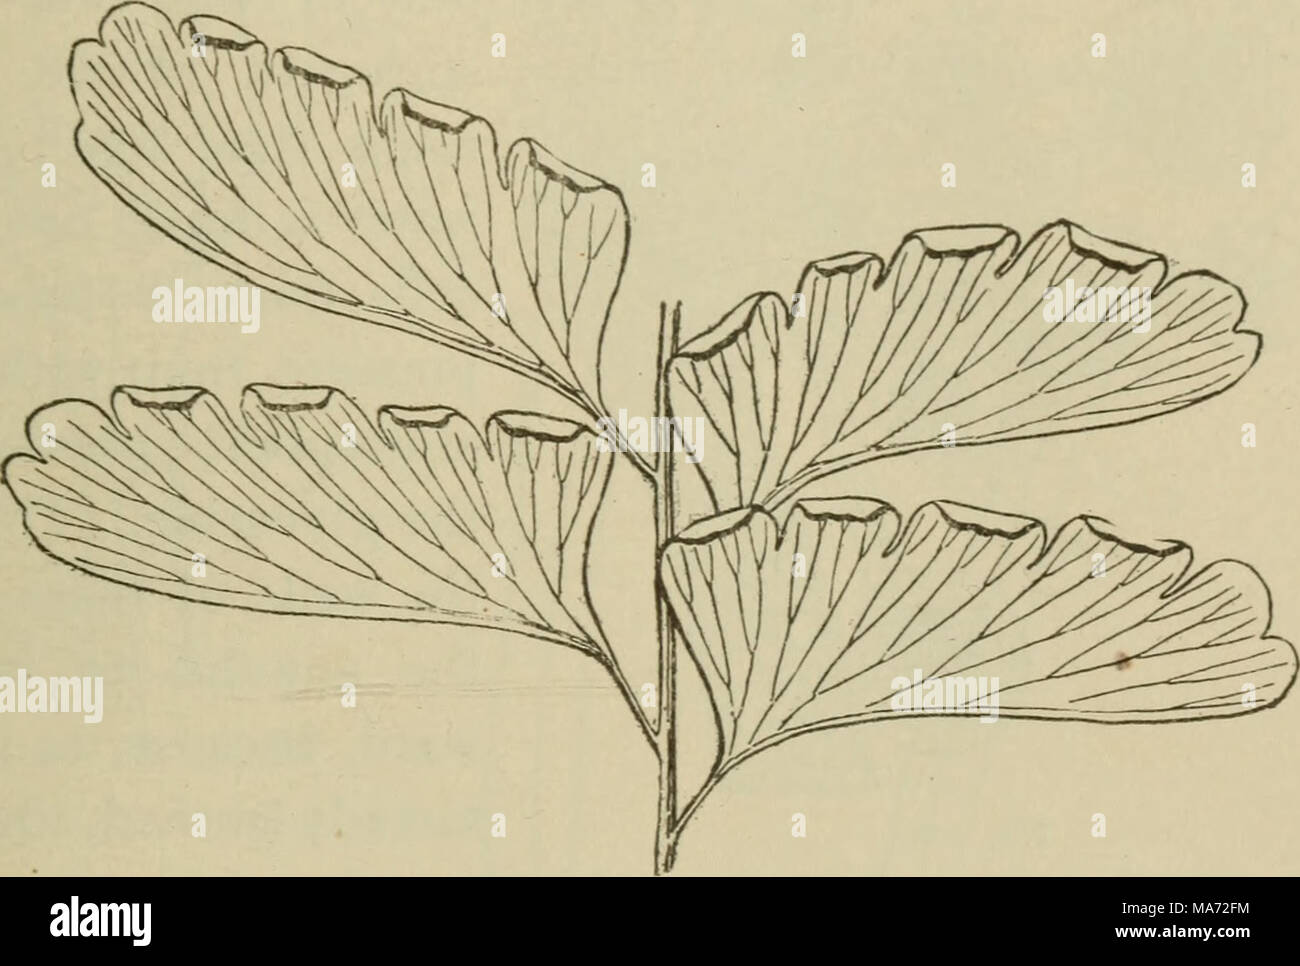 . Elementary botany . Fig. 207. Four pinnae of adiantum, showing recurved margins which cover the sporangia. shown in fig. 211, and soon it snaps quickly, to near its former position, and the spores are at the same time thrown for a consid- erable distance. This movement can sometimes be seen with the aid of a good hand lens. 352. How does this opening and snapping of the sporan- gium take place ?—We are now more curious than ever to see just how this opening and snapping of the sporangium takes place. We should now mount some of the fresh sporangia in water and cover with a cover glass for mi Stock Photo